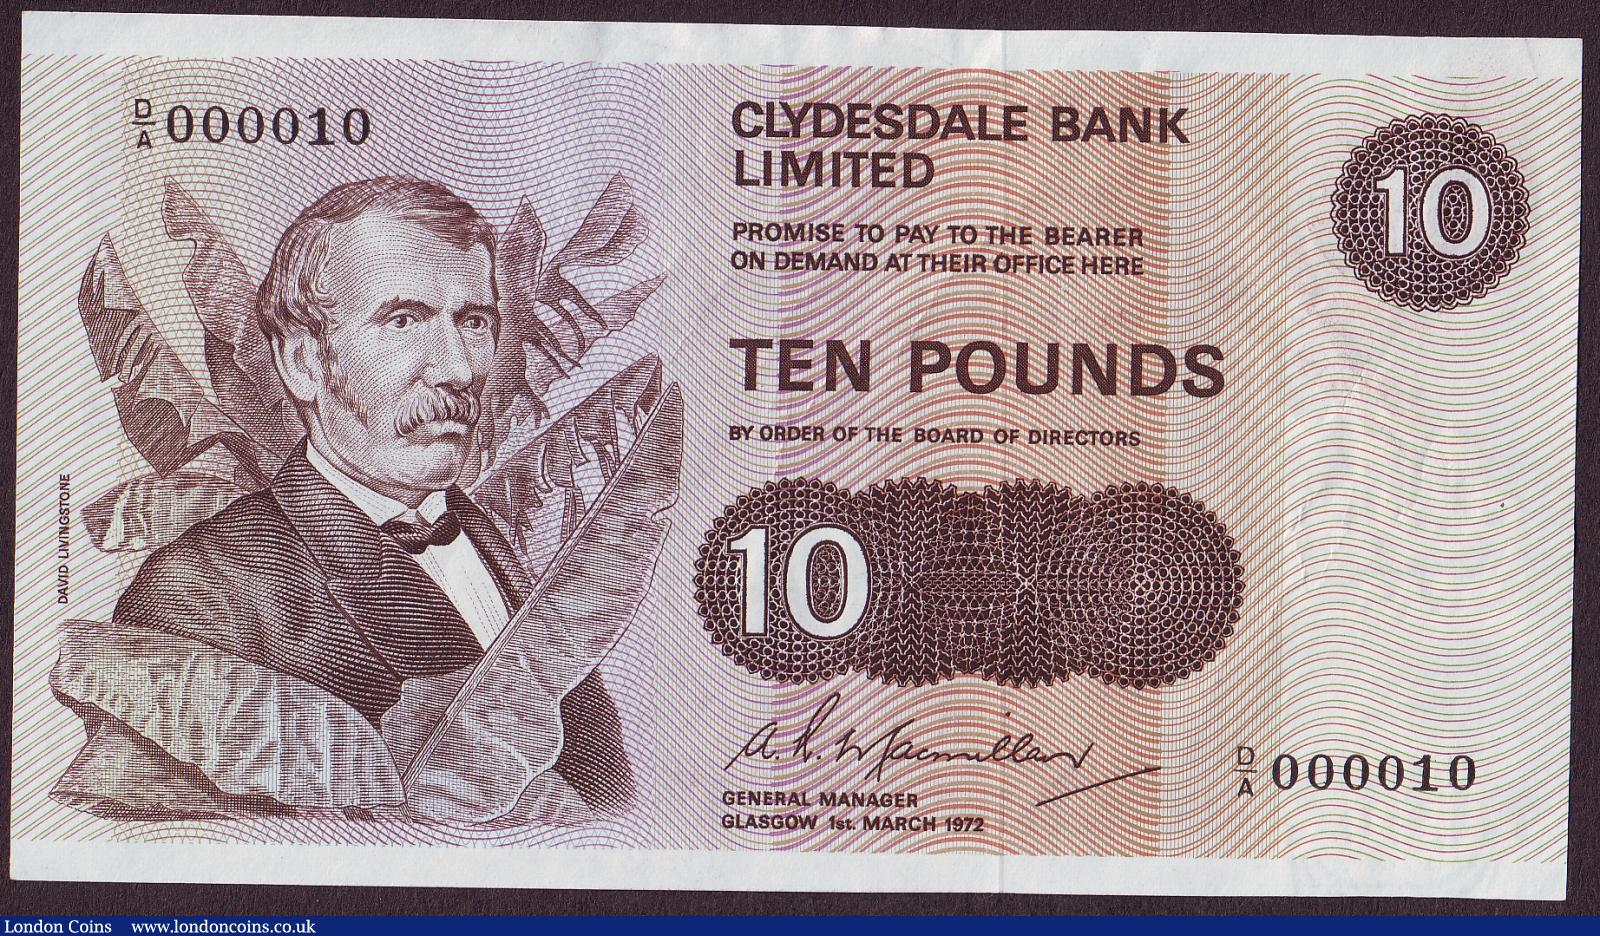 Scotland Clydesdale Bank Ltd £10 dated 1972, first run extremely low number D/A 000010, Pick207a, about EF and scarce : World Banknotes : Auction 128 : Lot 375